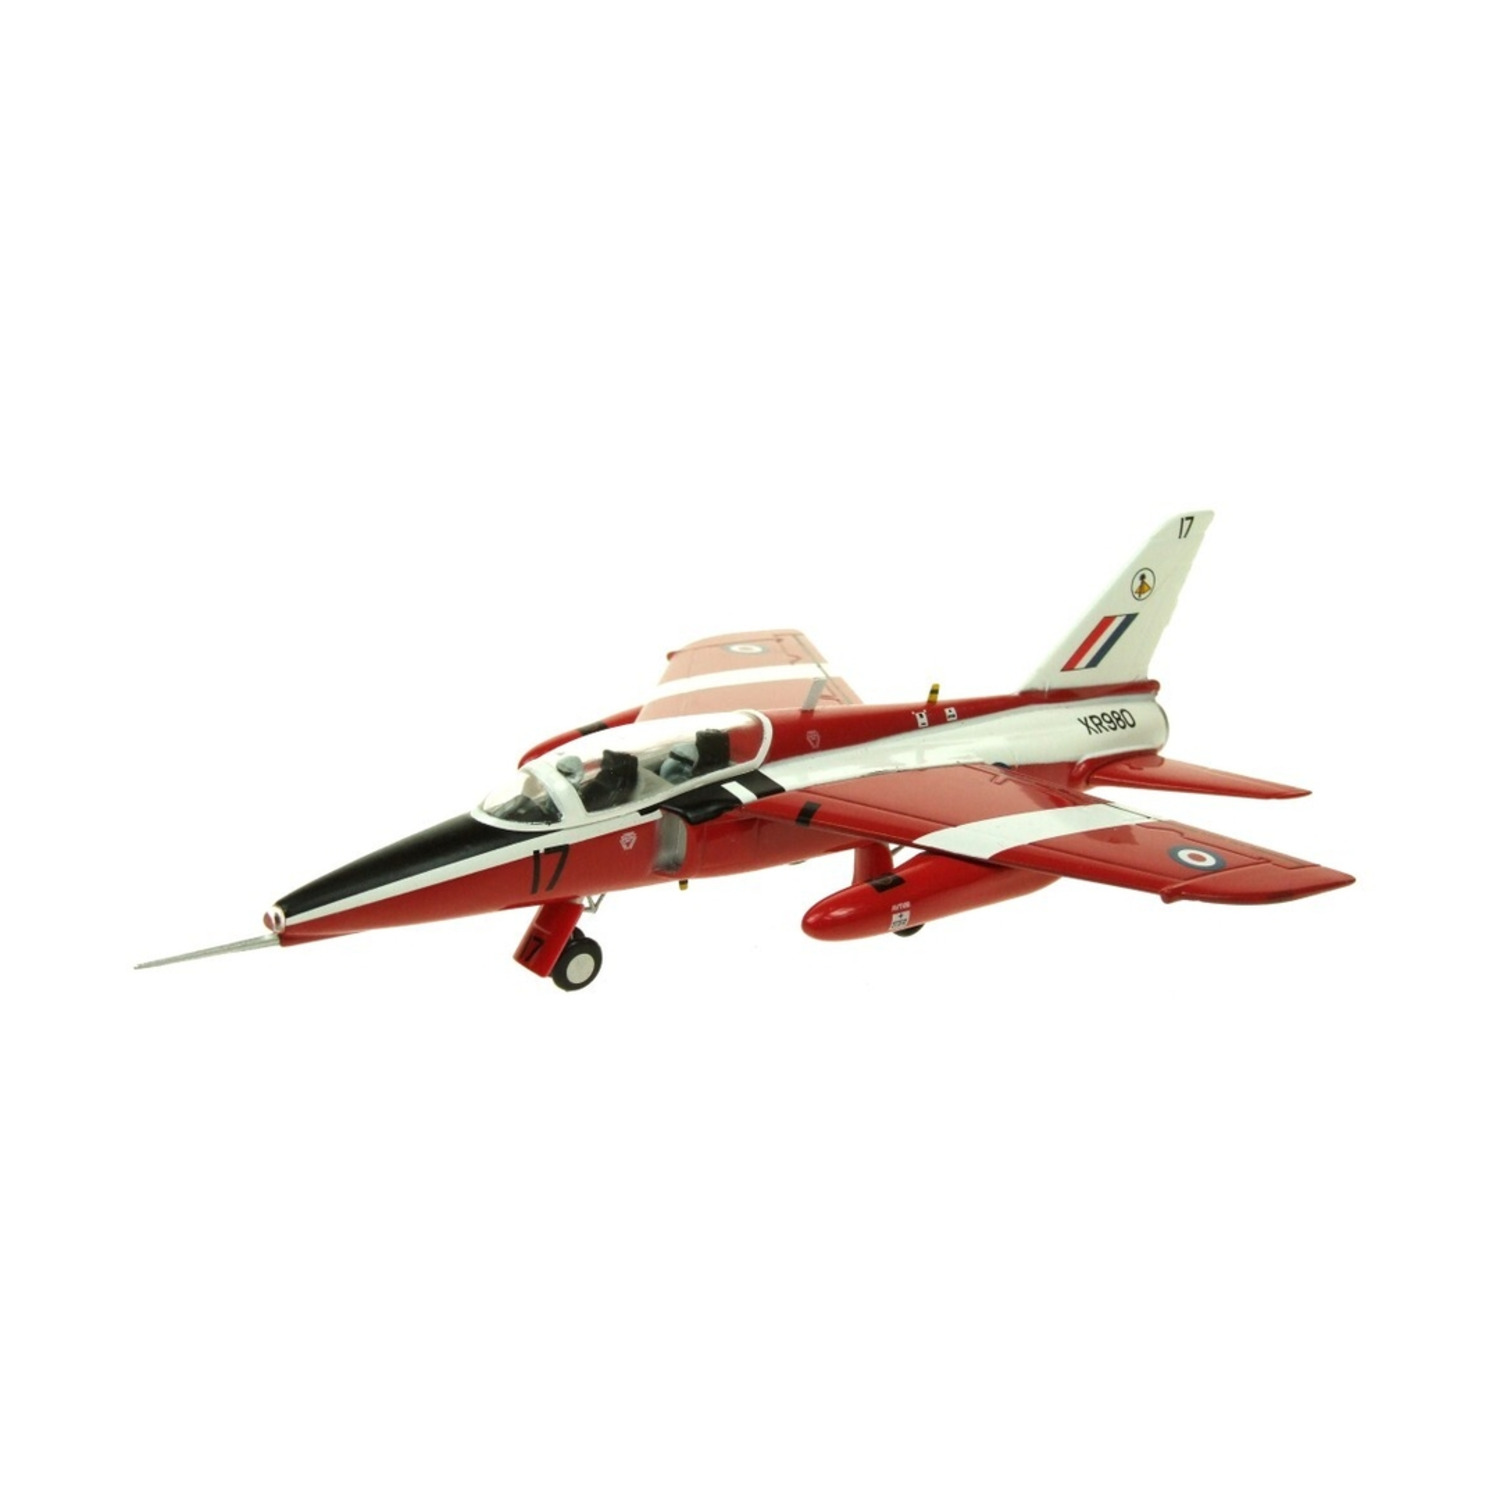 Folland Gnat 4 FTS RAF Valley XR980 (Limited Edition) New - image 1 of 3